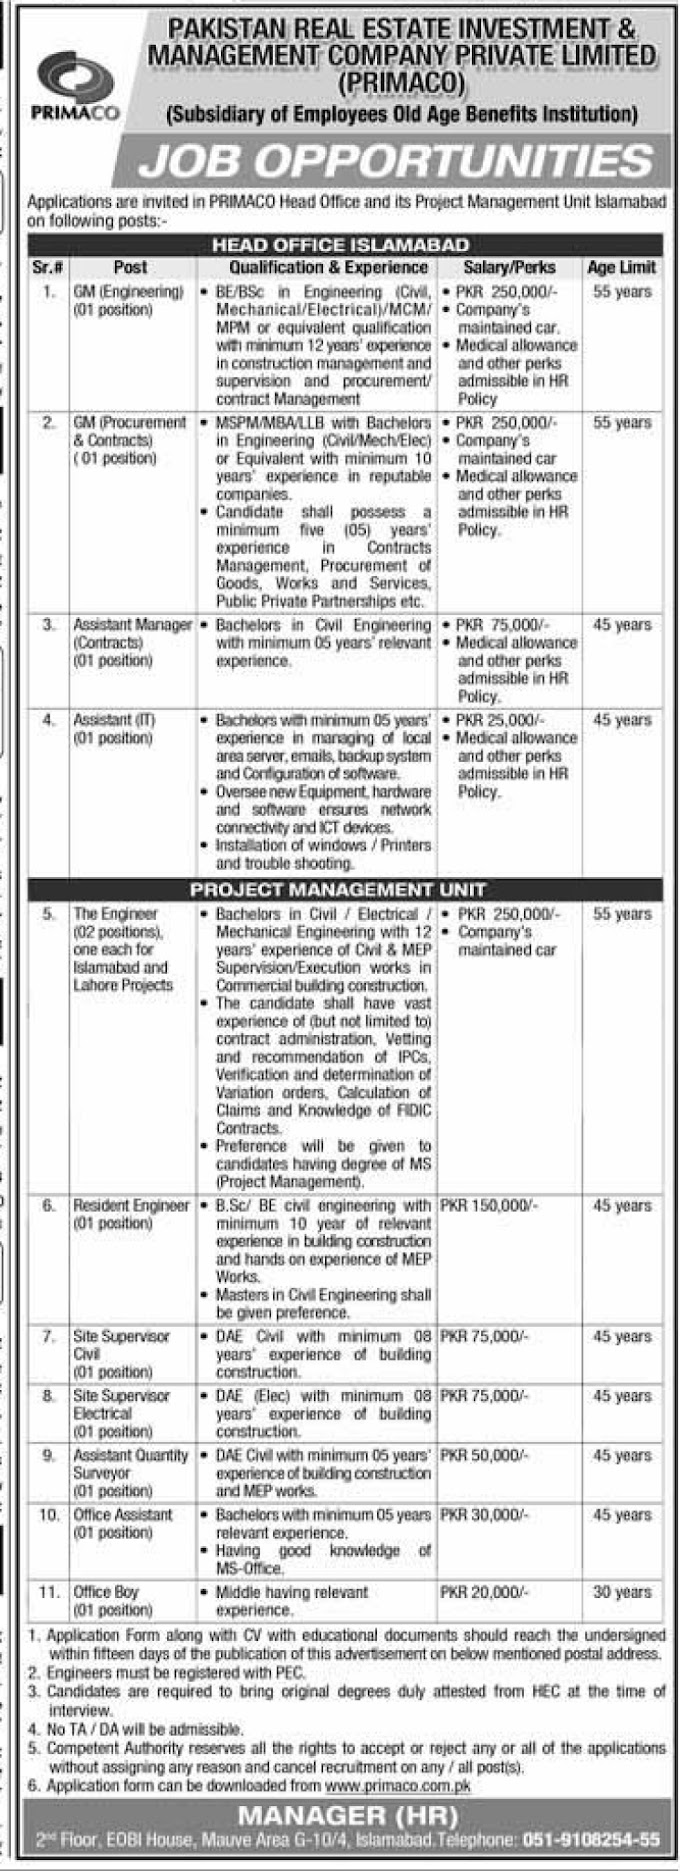 Pakistan Real Estate Investment & Management Company Jobs 2021